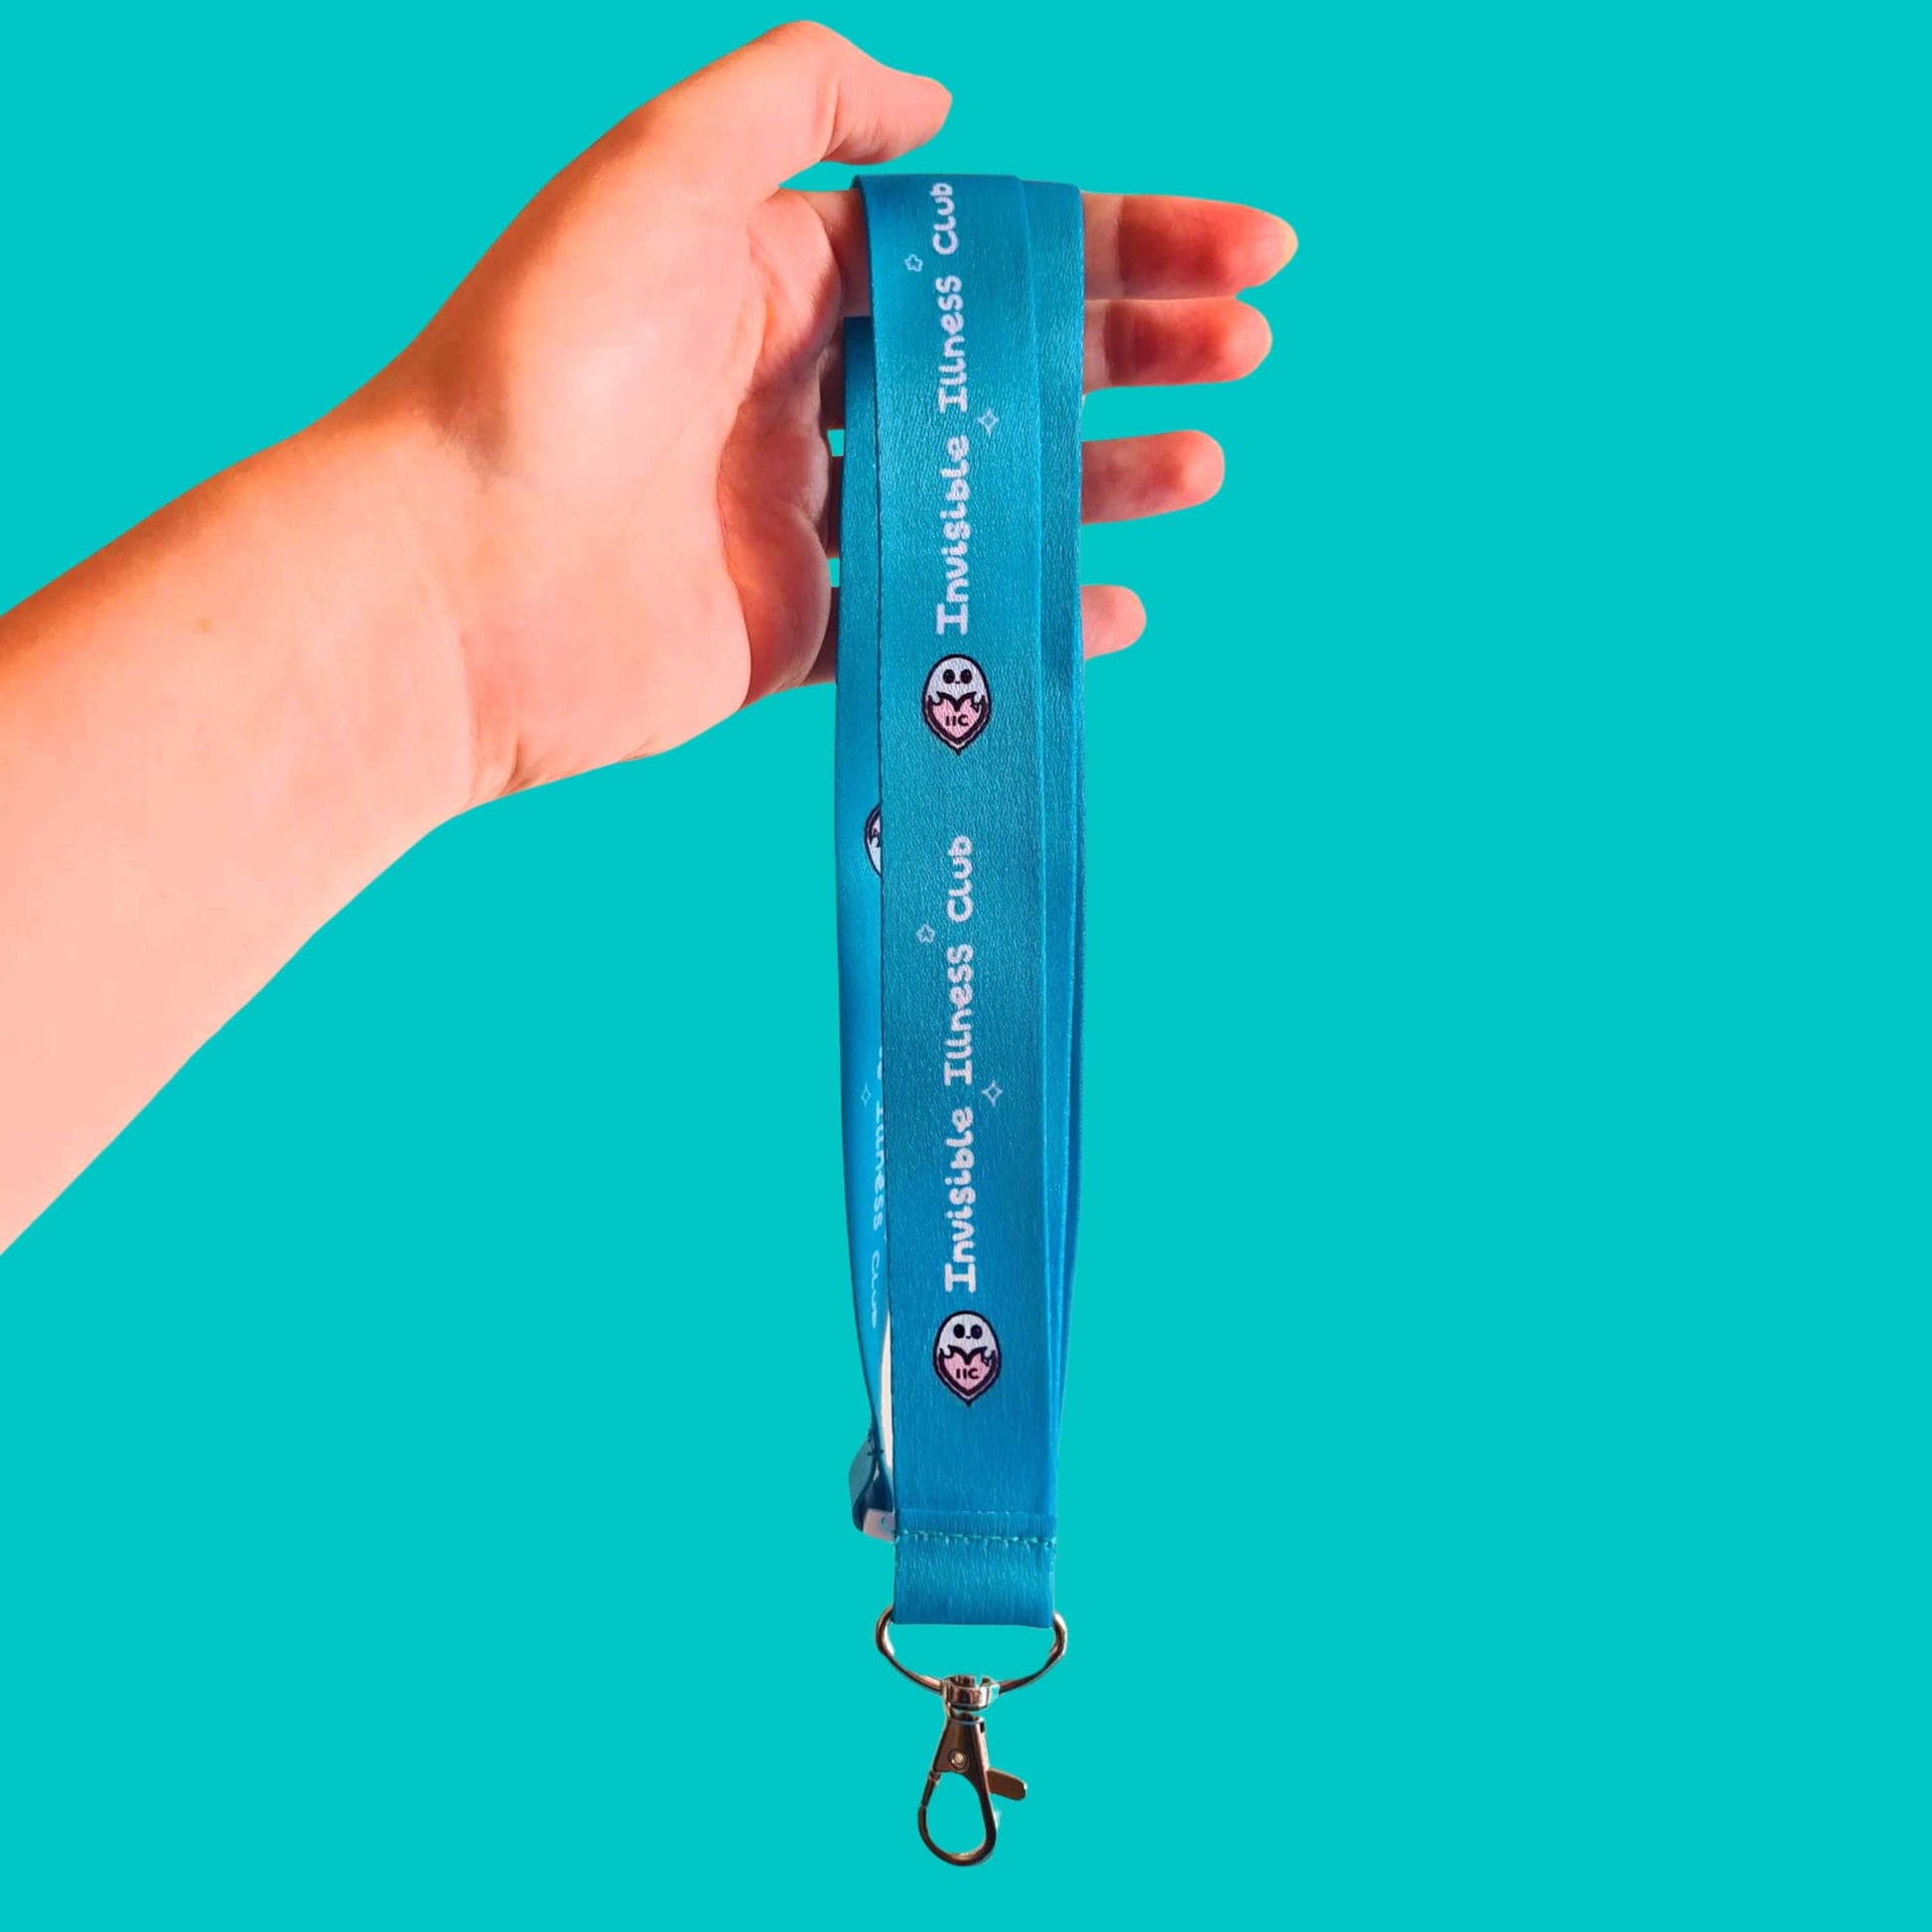 The Invisible Illness Club Lanyard held over a blue background. The pastel blue lanyard has repeating white text reading 'invisible illness club' and innabox pastel ghost logo. It has a silver lobster clip and white safety break. The hand drawn design is raising awareness for hidden disabilities.